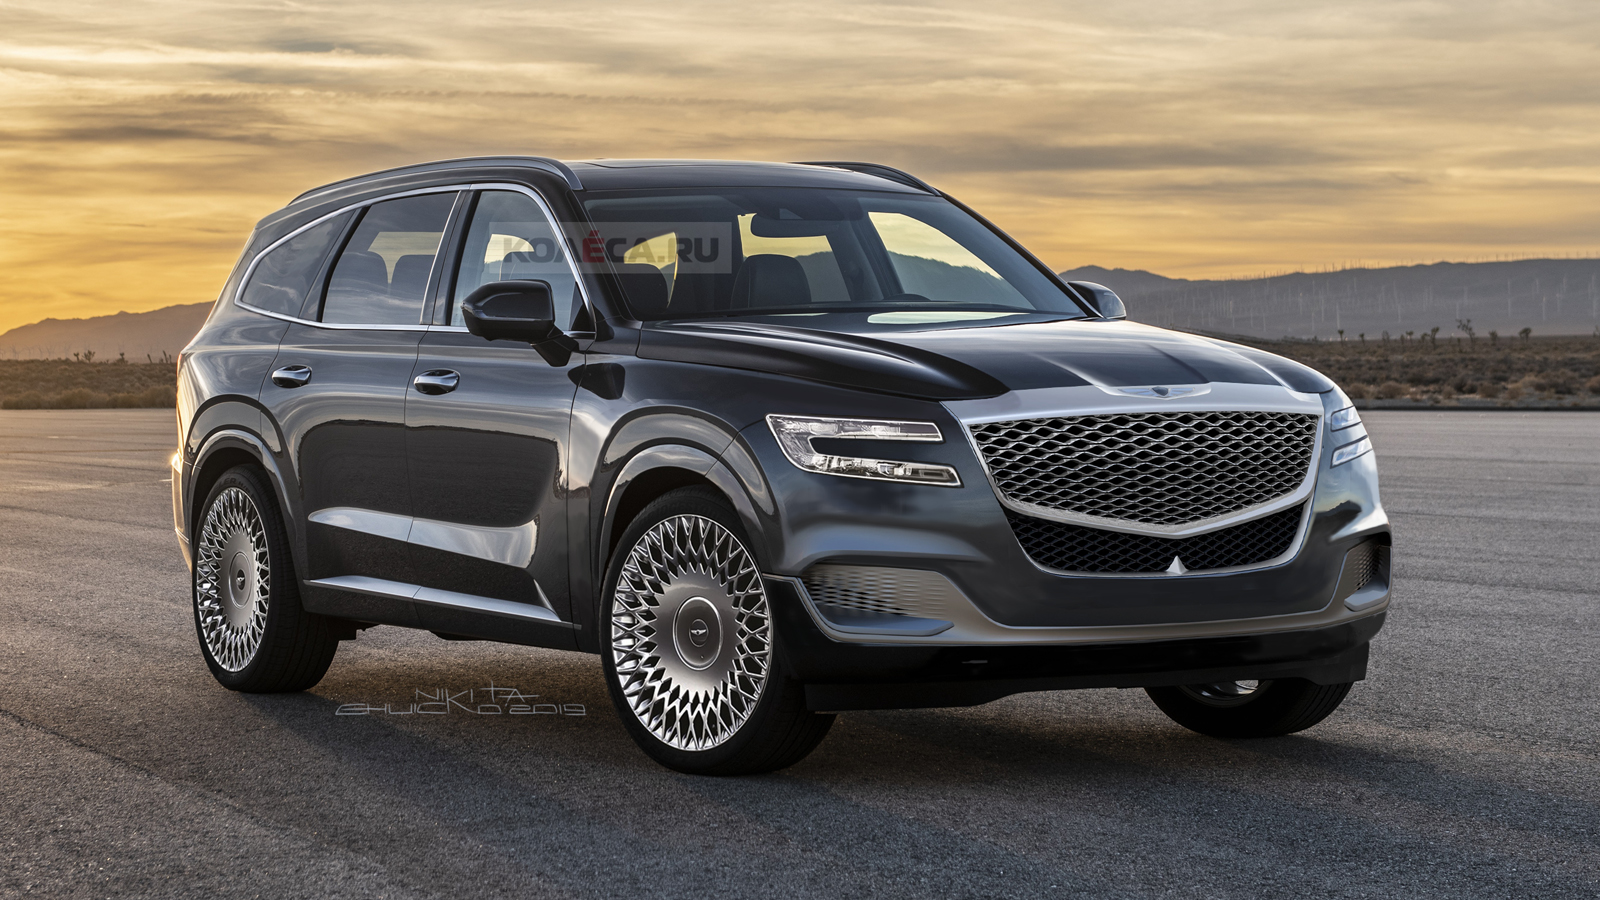 2020 Genesis GV80 SUV: Concept Could Conservatively Morph ...
